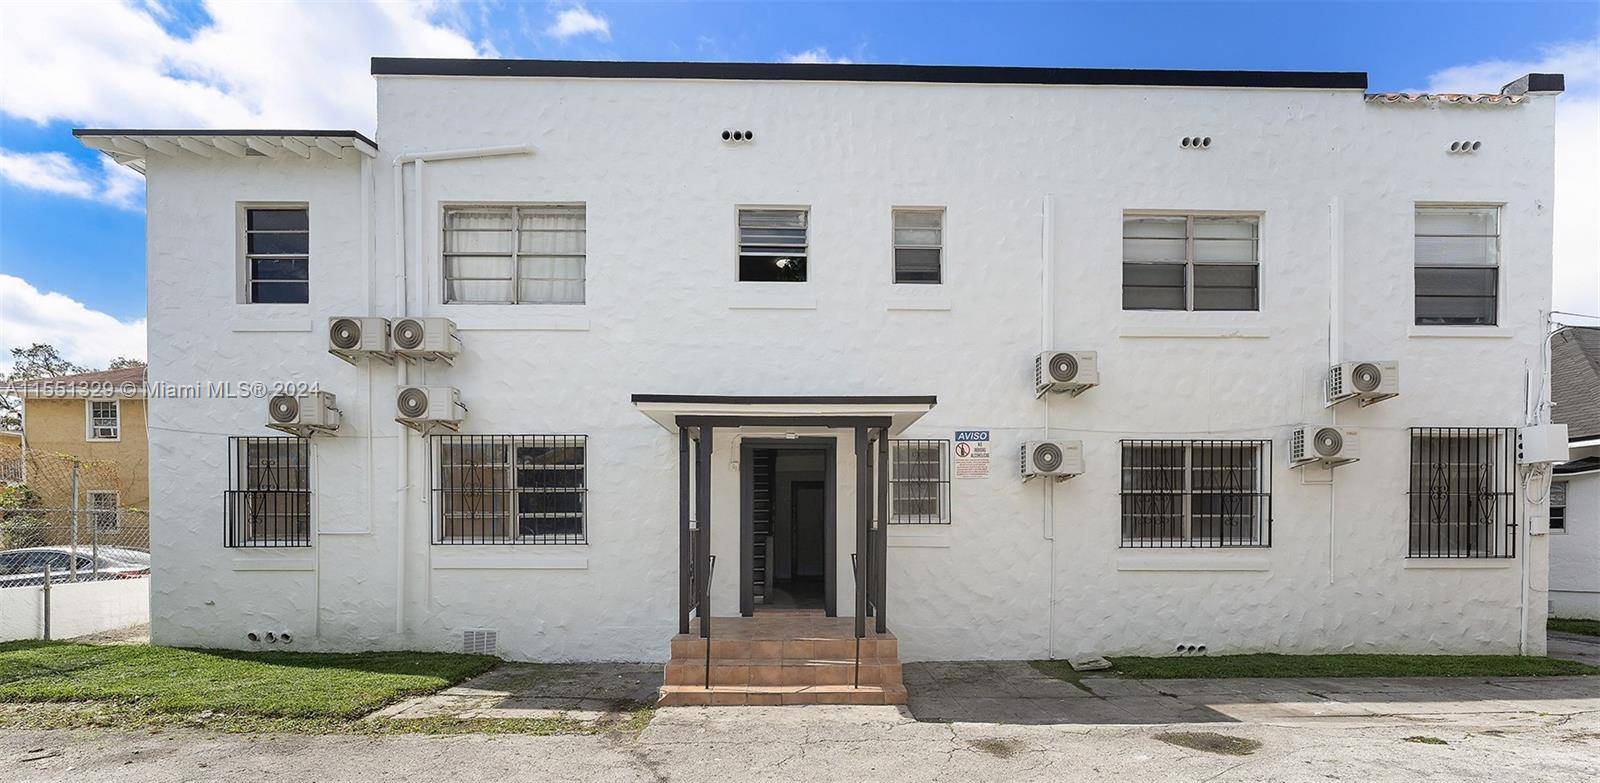 Great income producing investment opportunity in Little Havana.